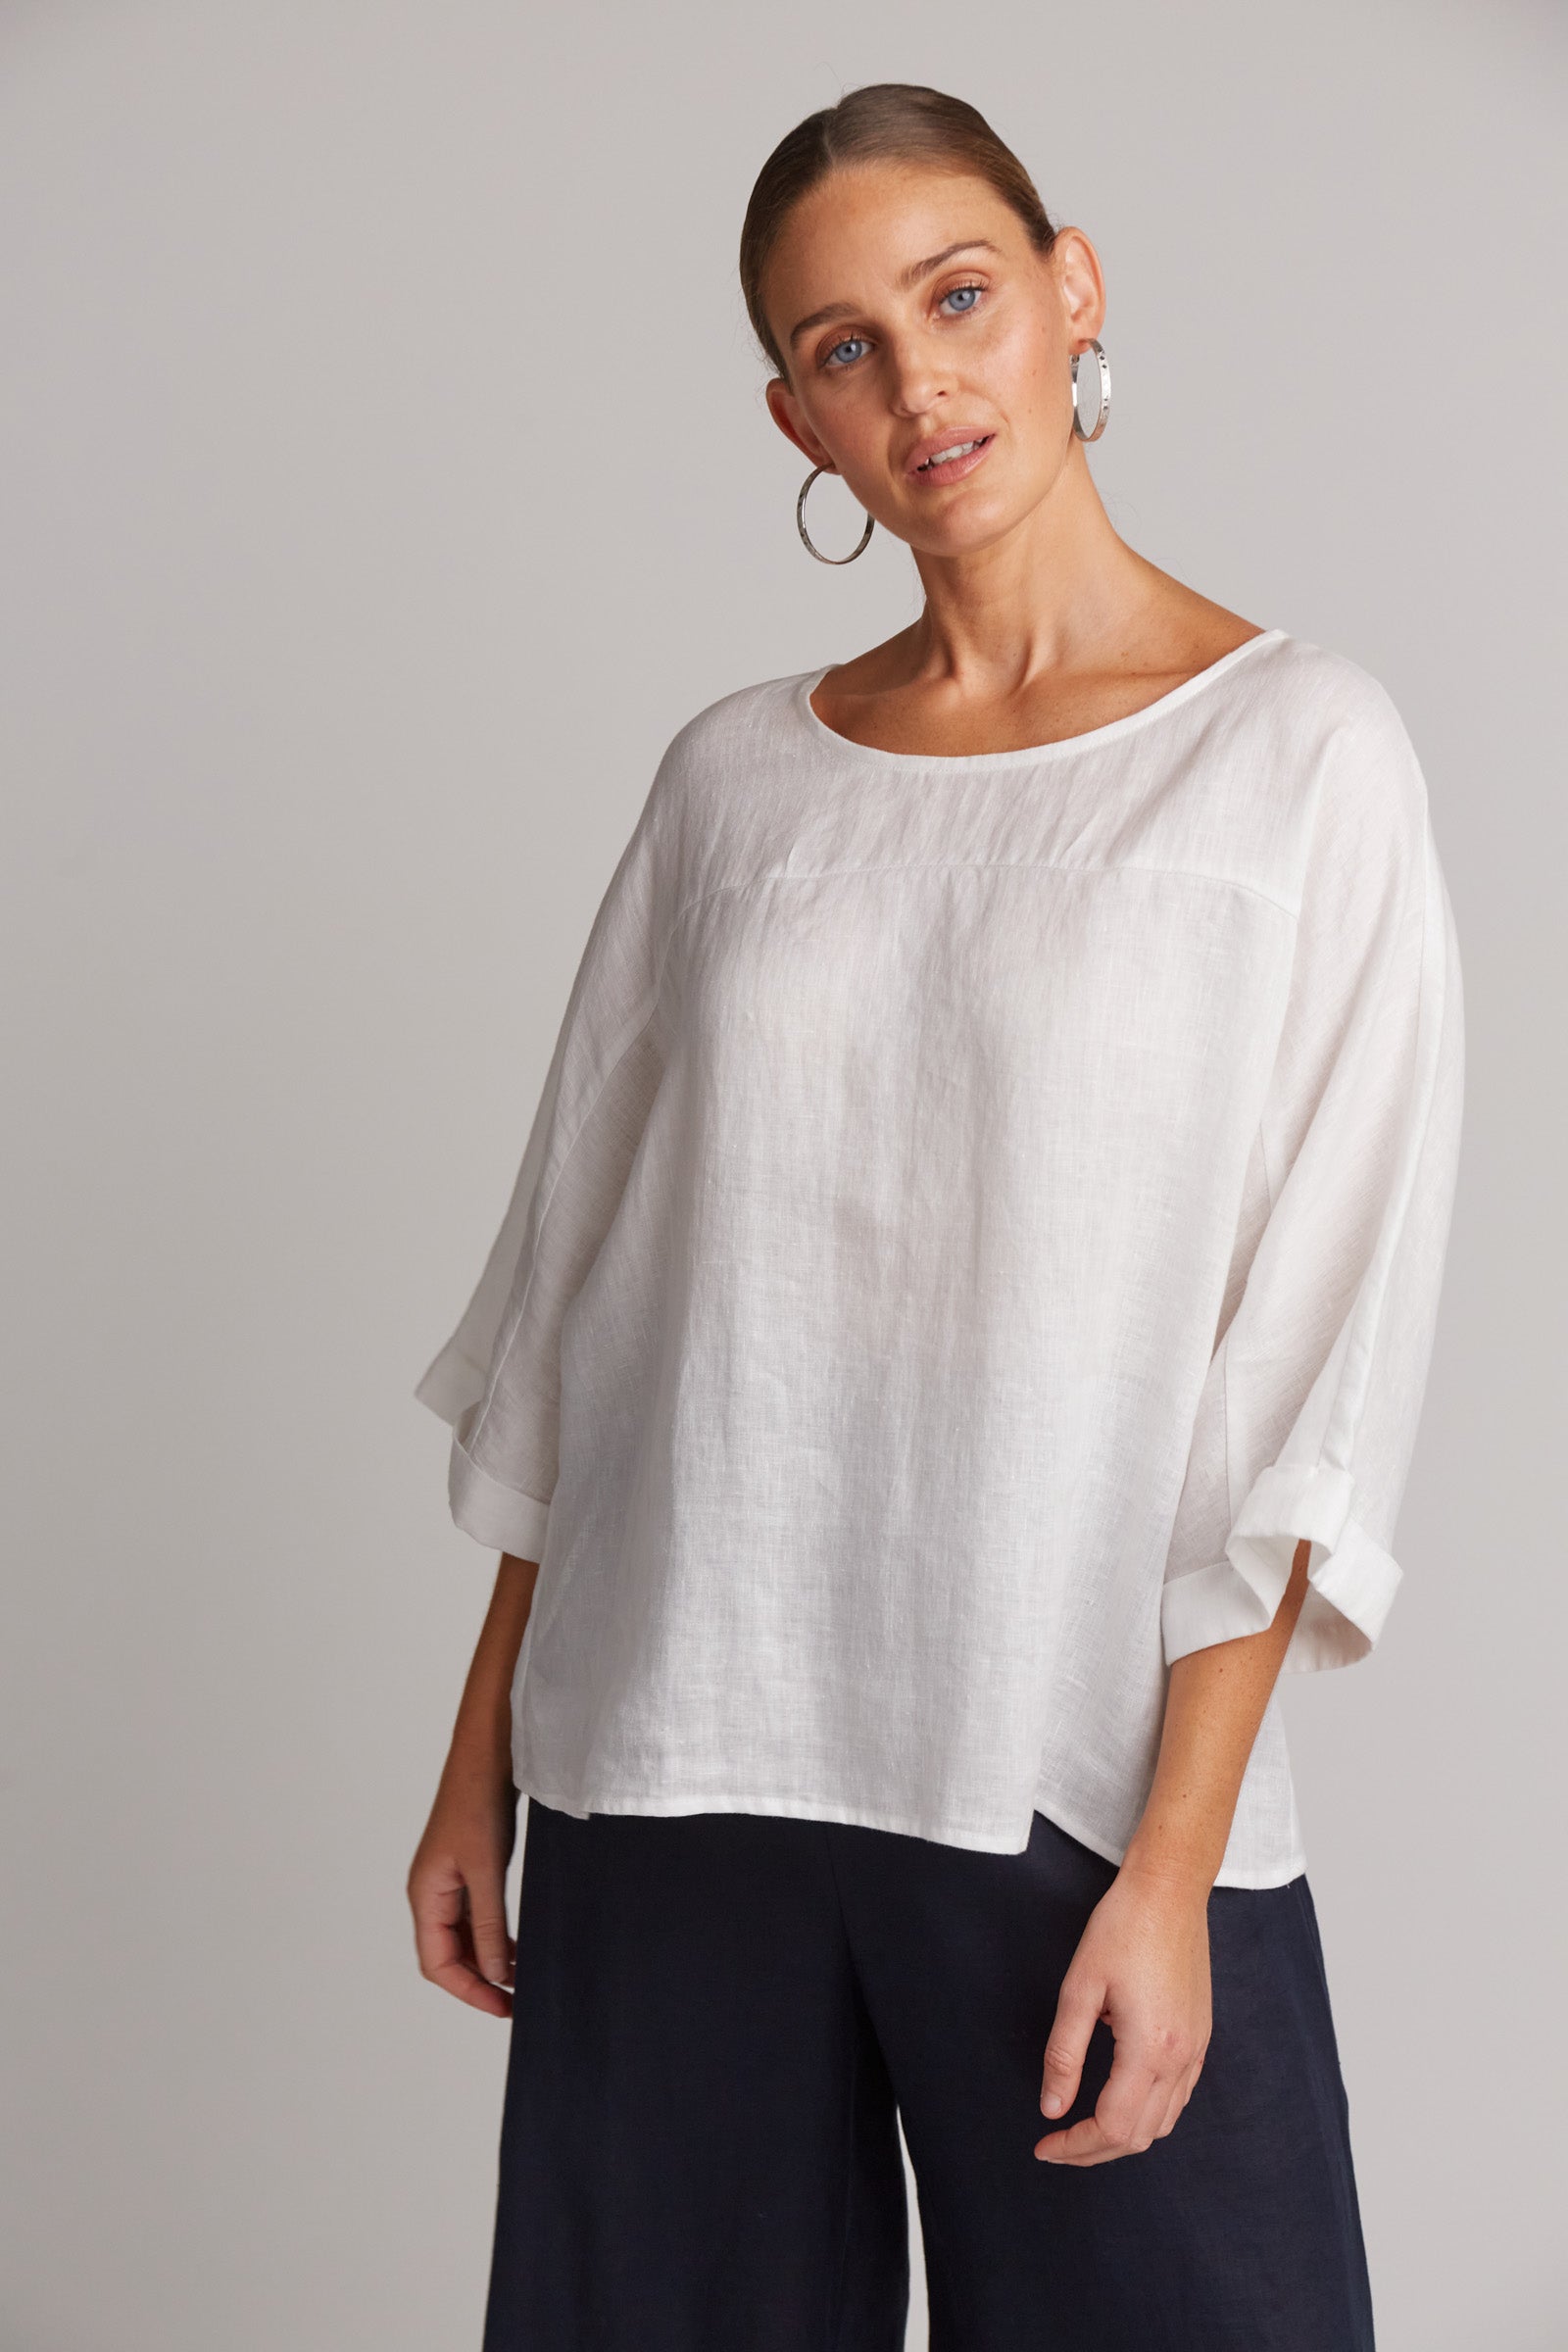 Studio Relaxed Top - Salt - eb&ive Clothing - Top 3/4 Sleeve Linen